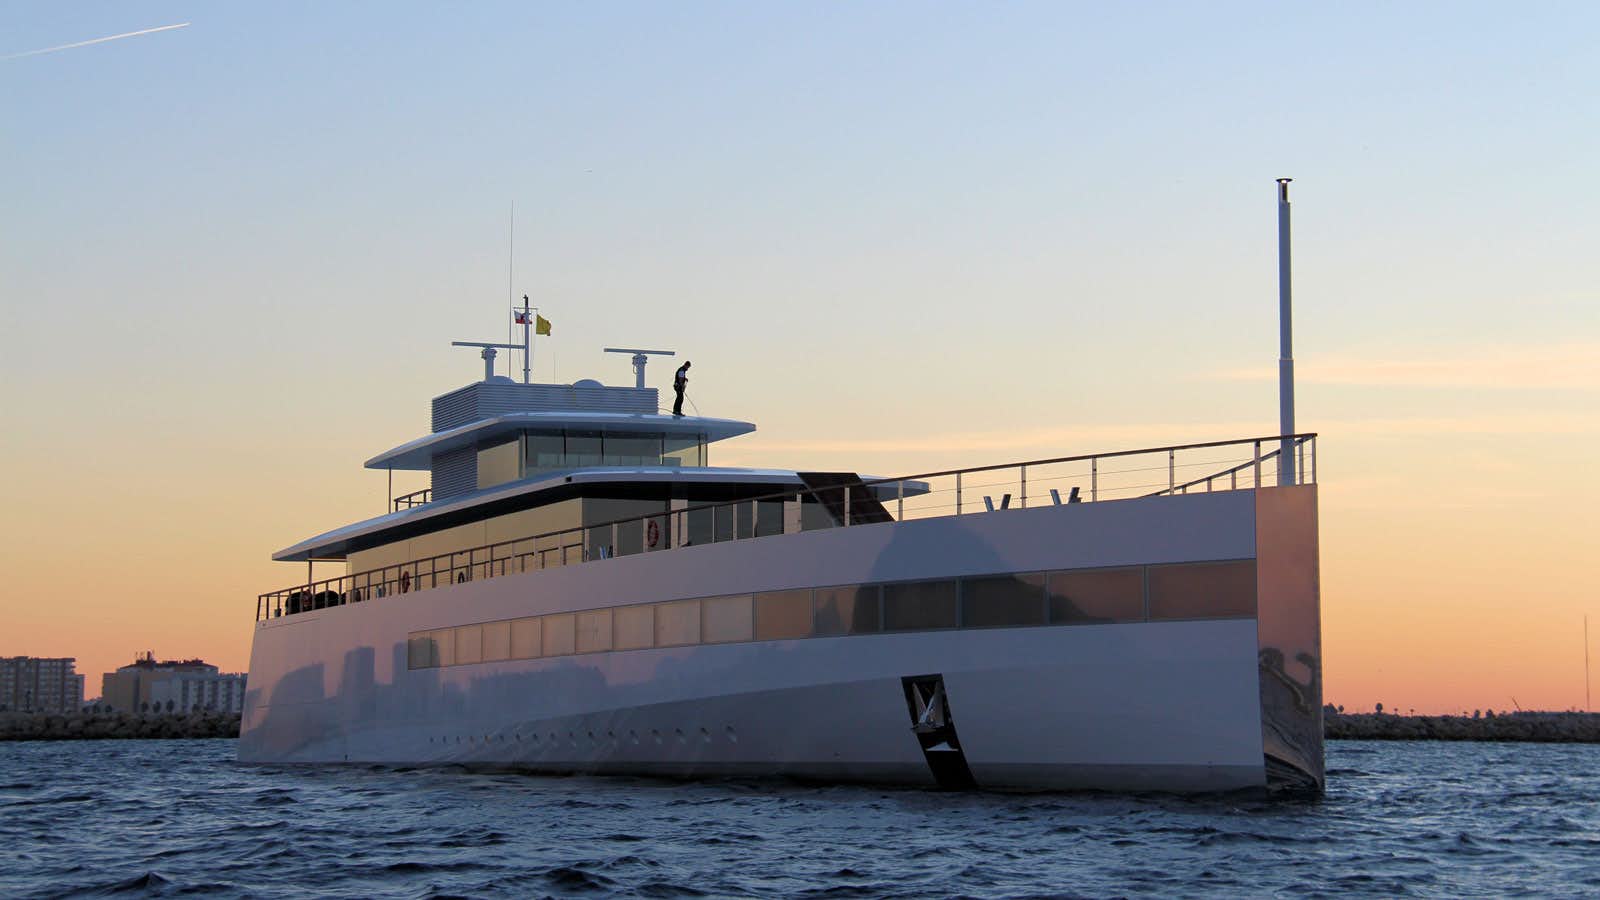 most expensive super yachts in the world